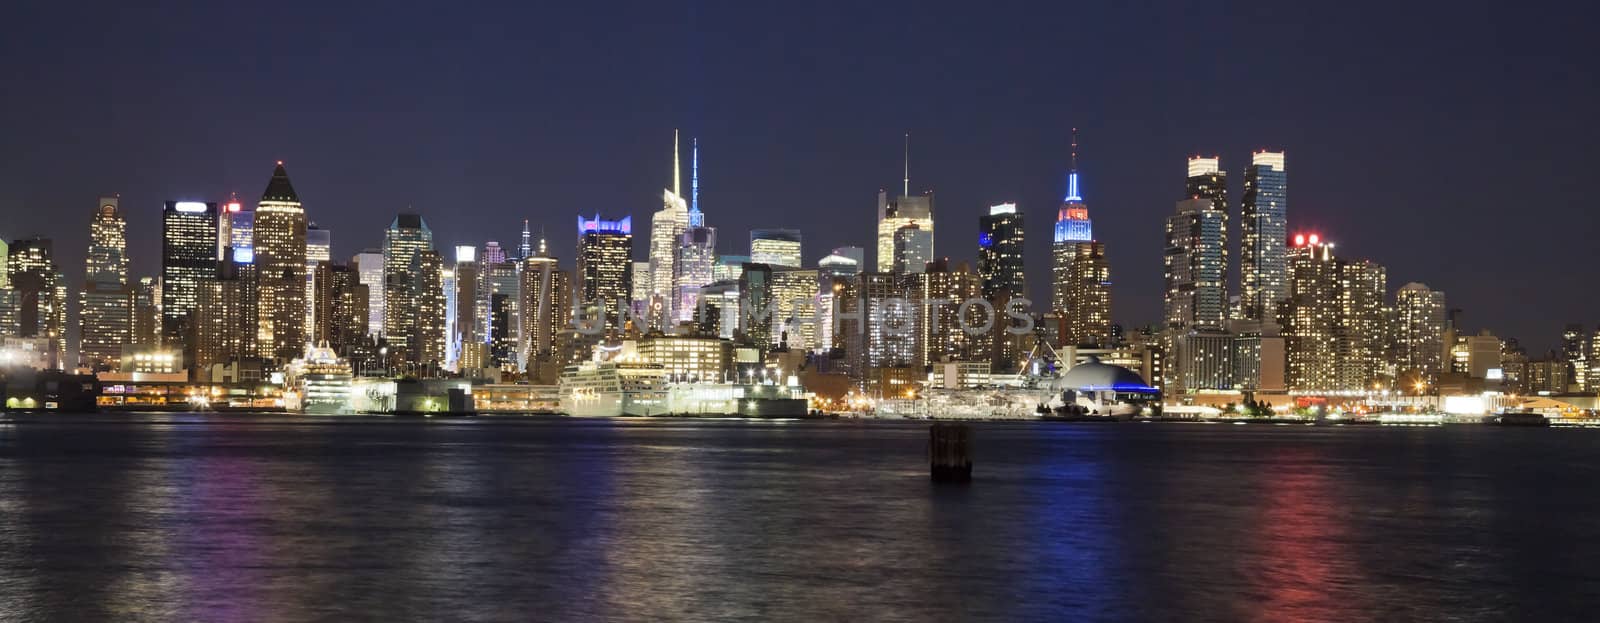 The New York City Uptown skyline in the night by hanusst